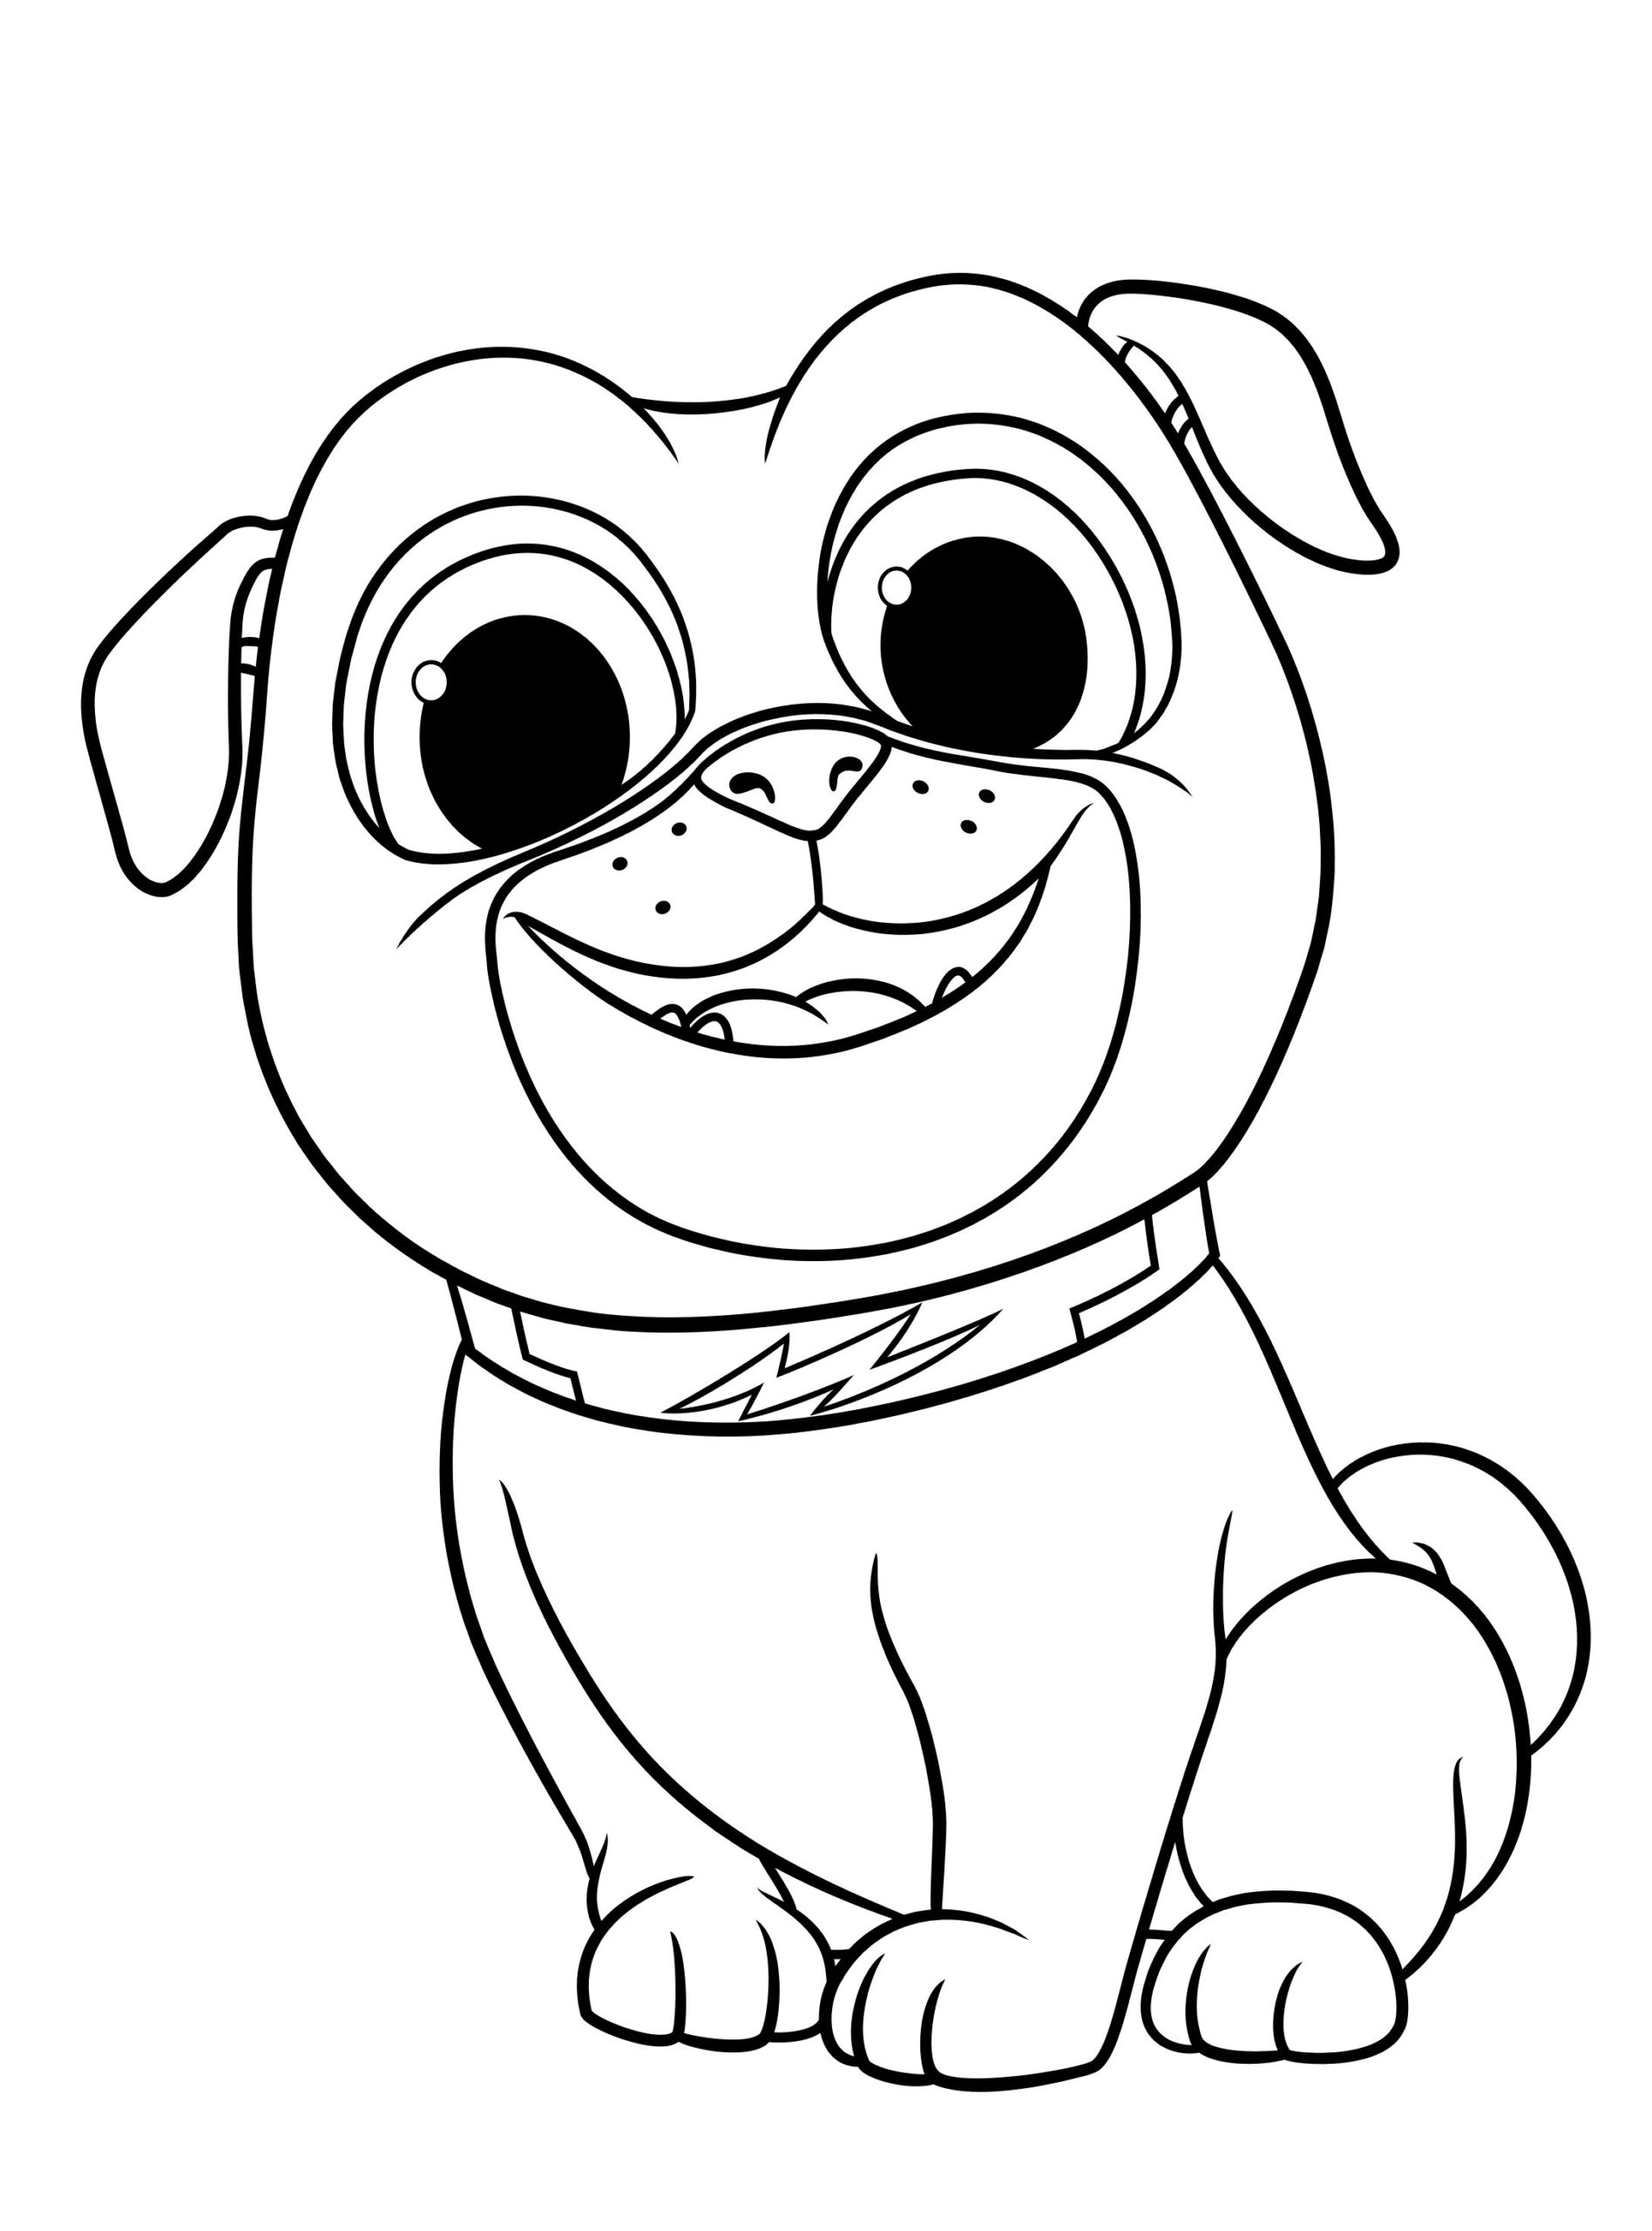 Coloring Pages : Coloring Most Preeminent Puppy Dog Pals Printable ...